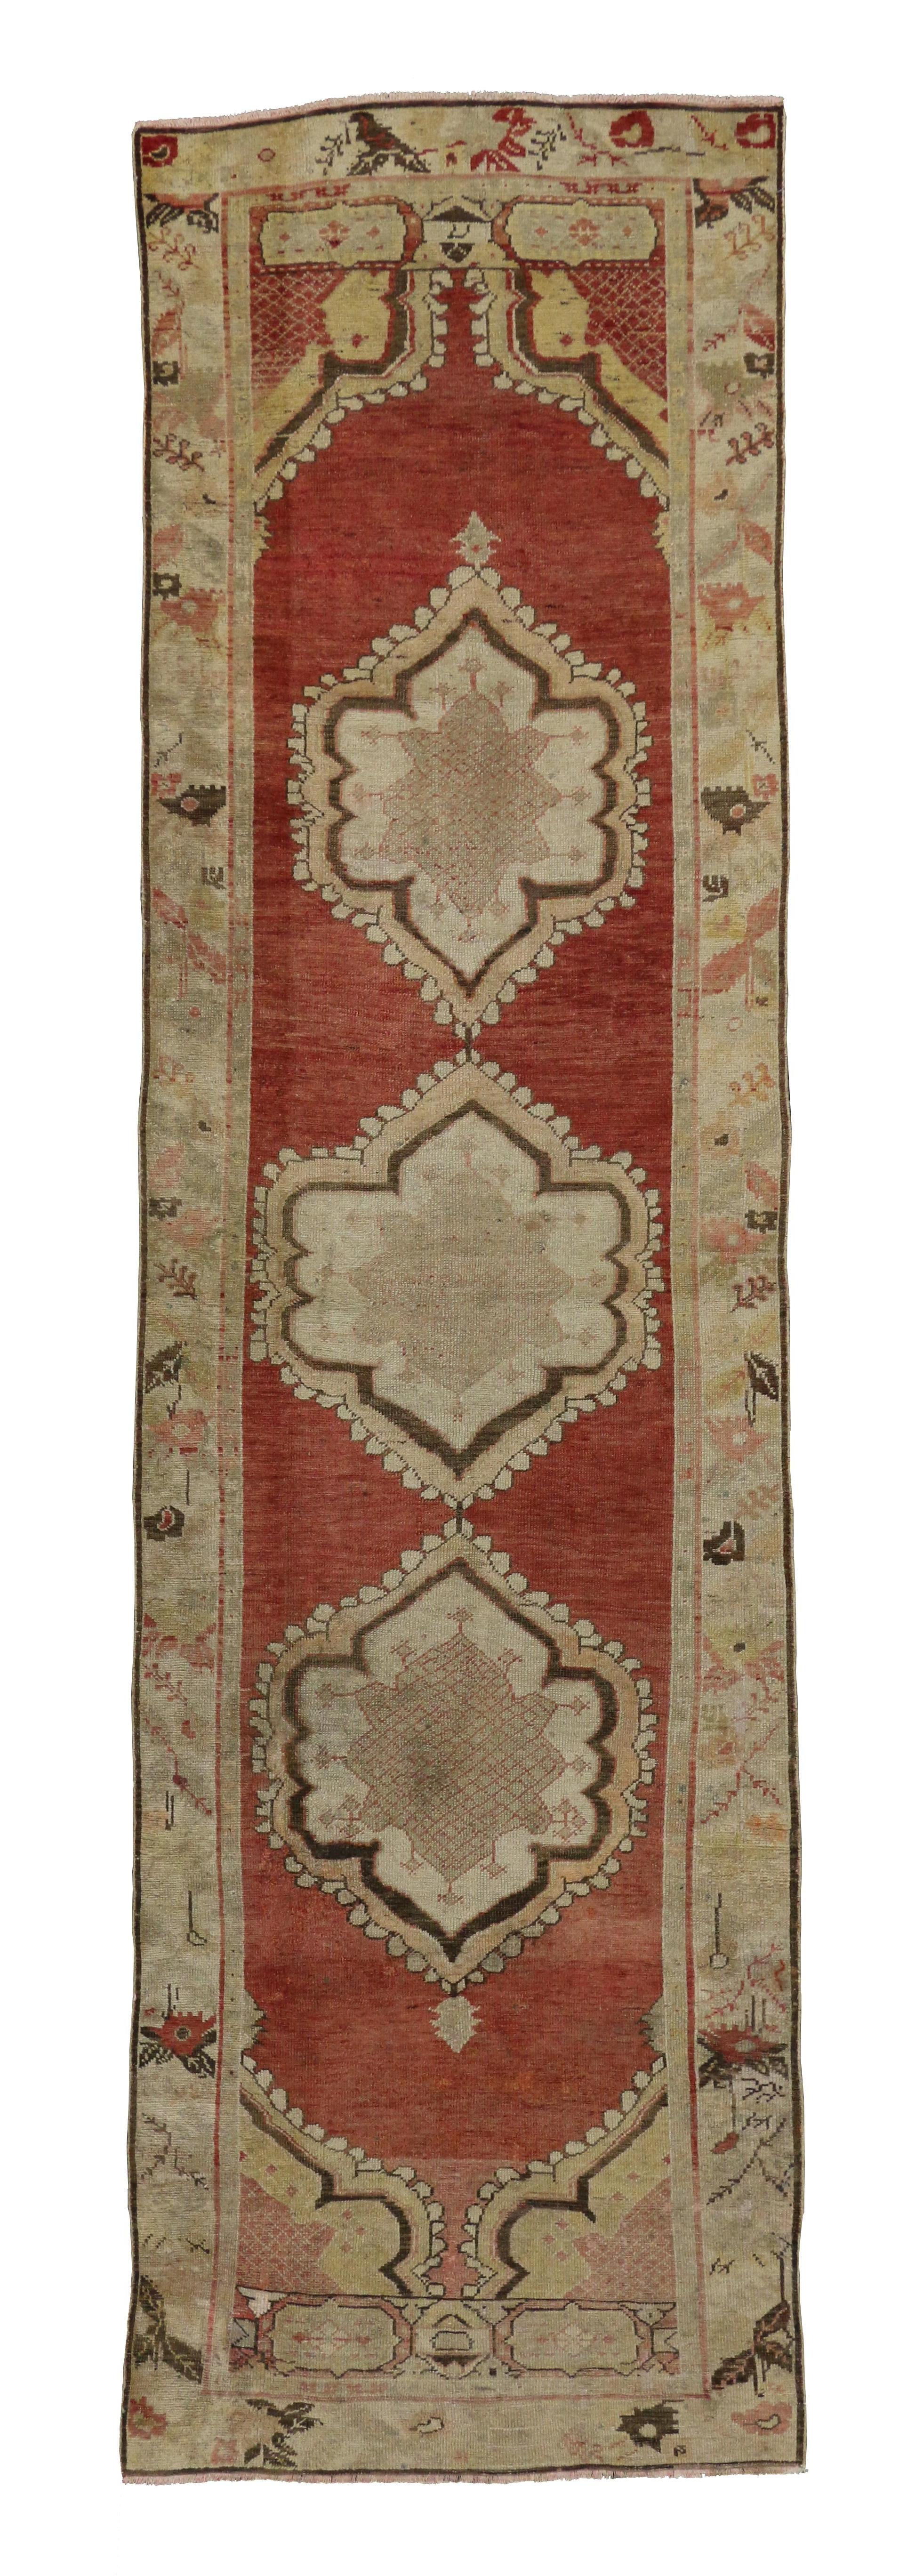 50670 Vintage Turkish Oushak Runner with Rustic Mid-Century Modern Style 03'02 x 11'07. Warm and inviting, this hand-knotted wool vintage Turkish Oushak runner beautifully embodies Mid-Century Modern style with rustic vibes. The abrashed brick red